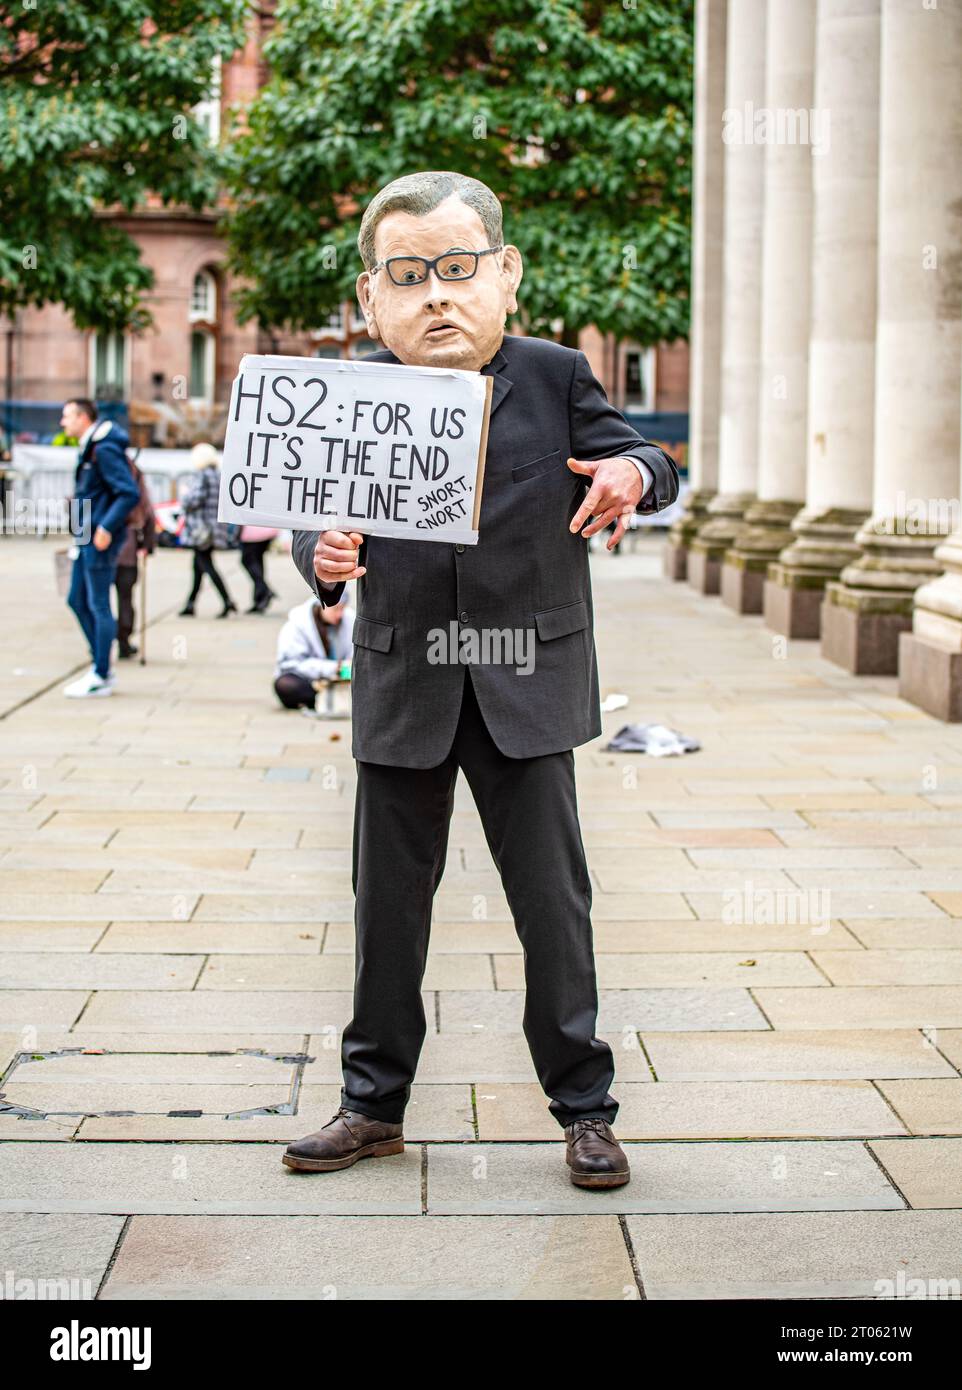 A protester in a parody mask mocking HS2 MANCHESTER, ENGLAND DIVISIVE IMAGES show the intense atmosphere surrounding the Conservative Conference in Ma Stock Photo